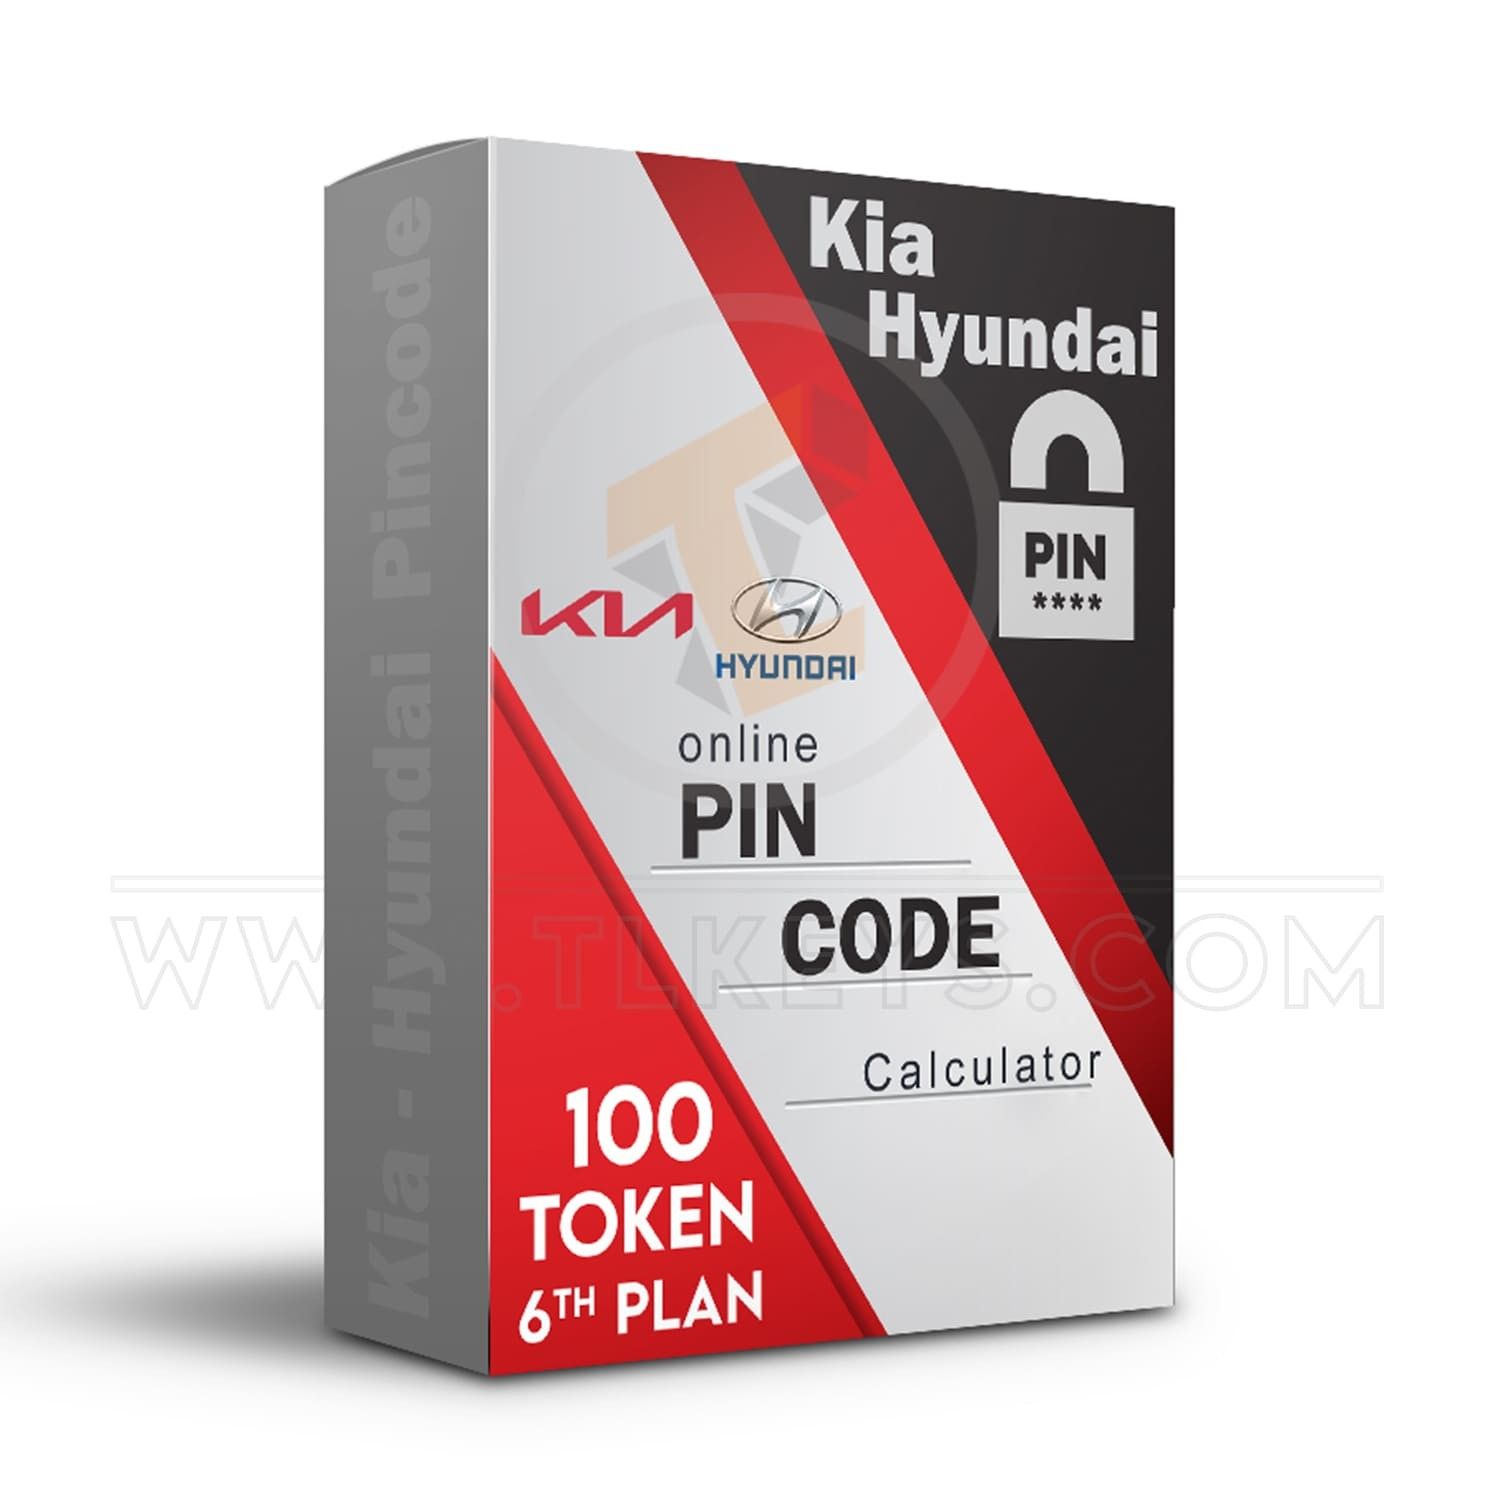 Exclusive Offer: Get 100 Tokens for Your Kia & Hyundai Pincode Calcula pin code